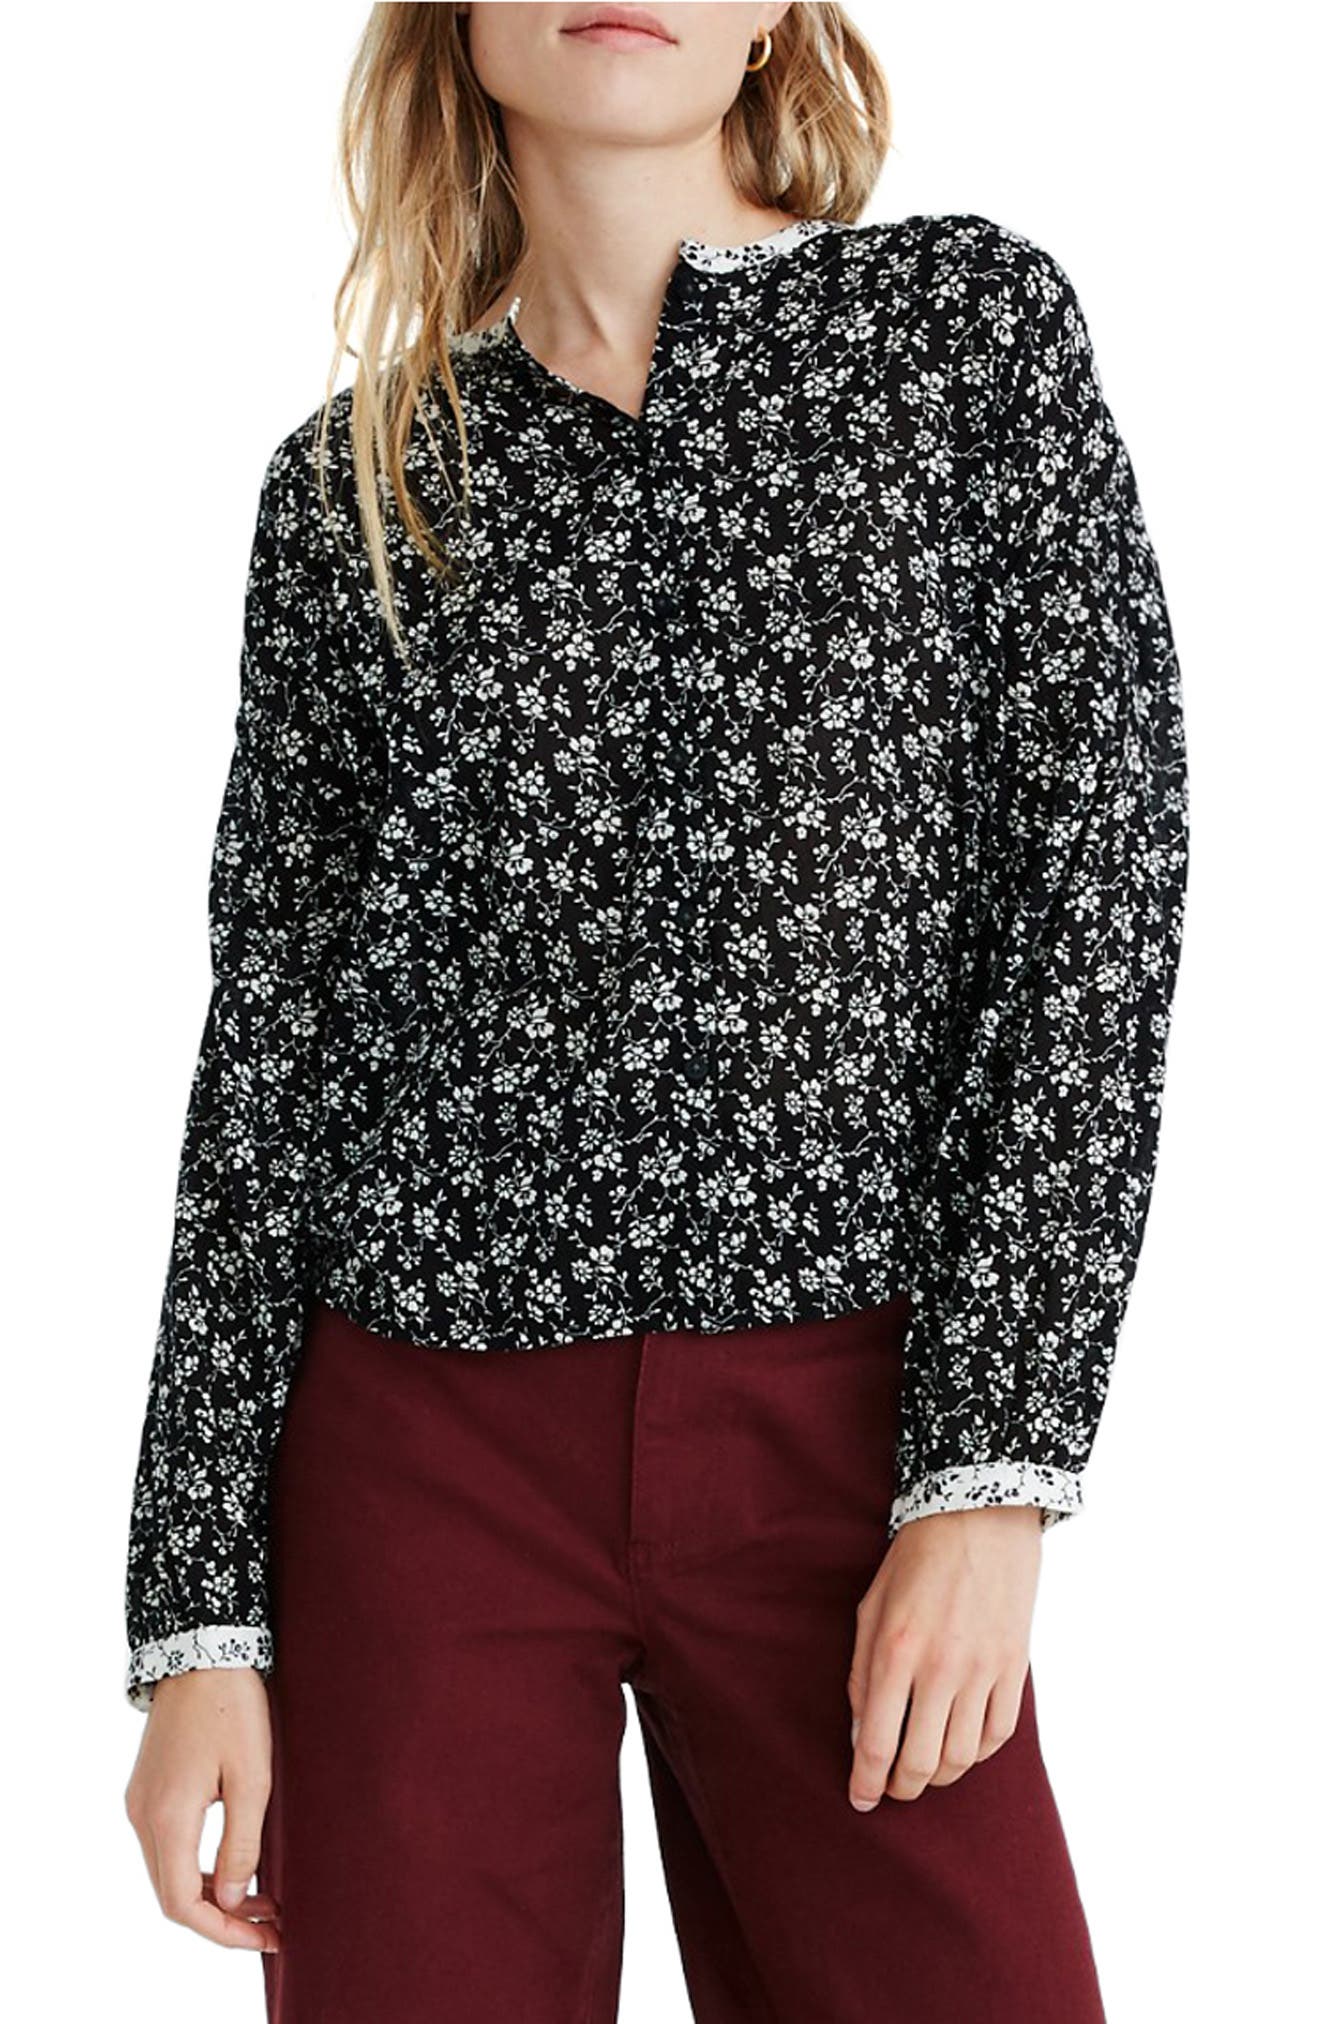 Madewell | Branch Floral Mixed Print Meadow Shirt | Nordstrom Rack